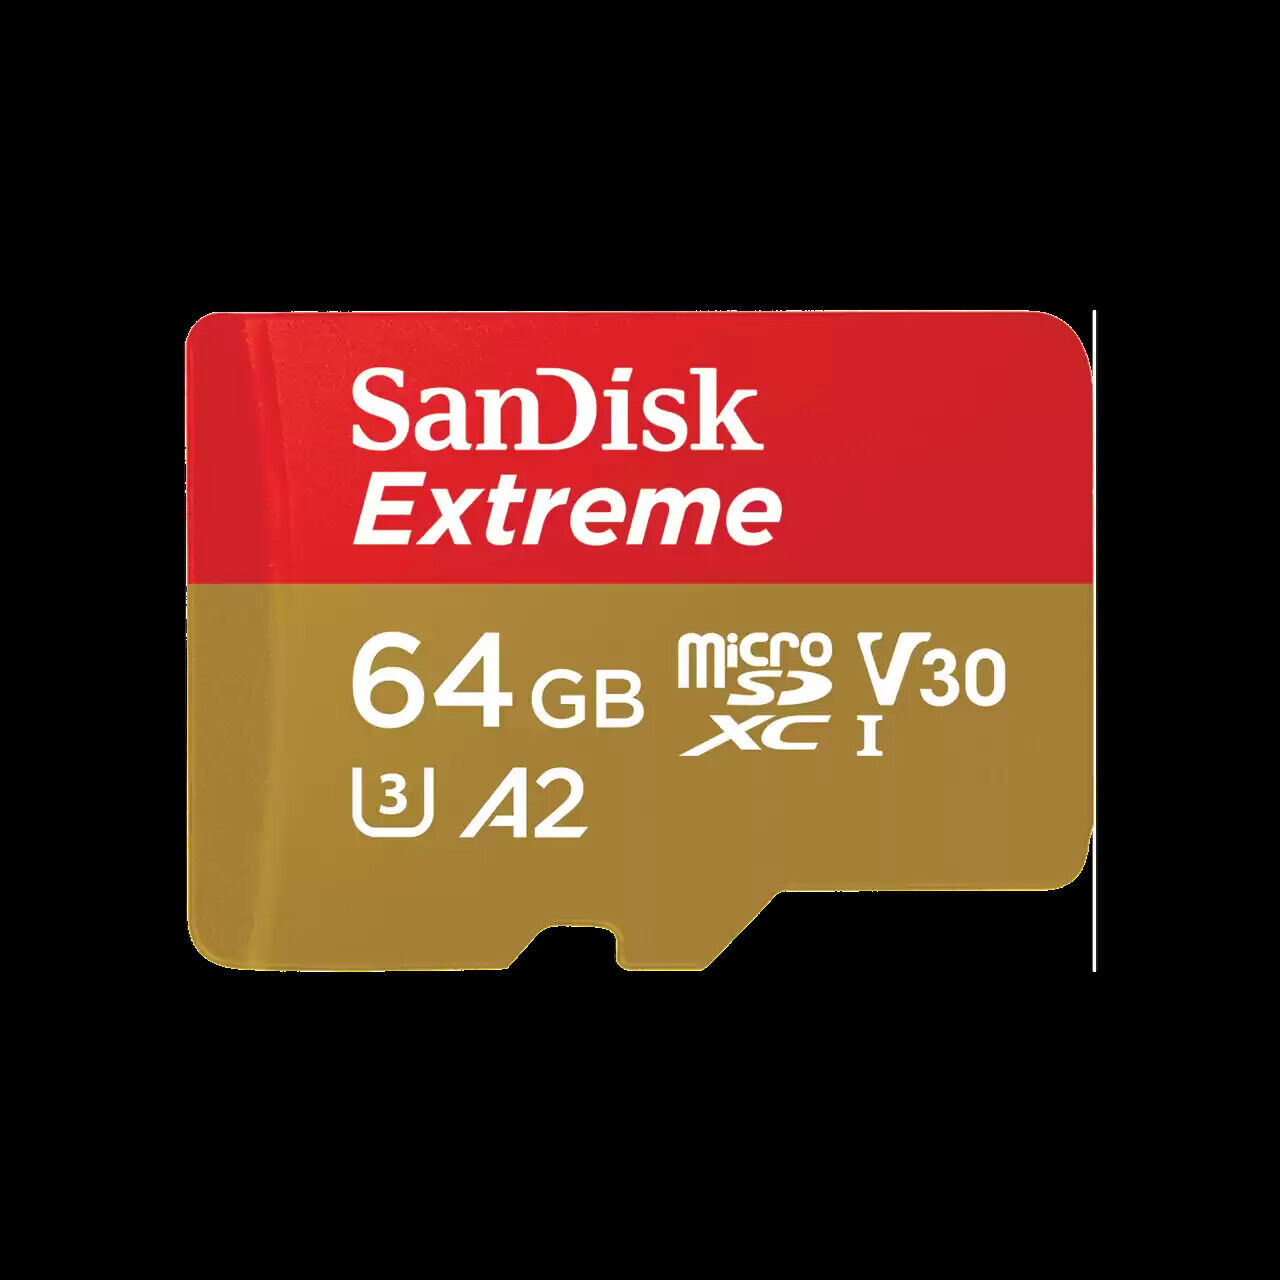 SanDisk 64GB Extreme microSDXC UHS-I Card (Up to 160 MBPs) - SDSQXAH-064G-GN6MA